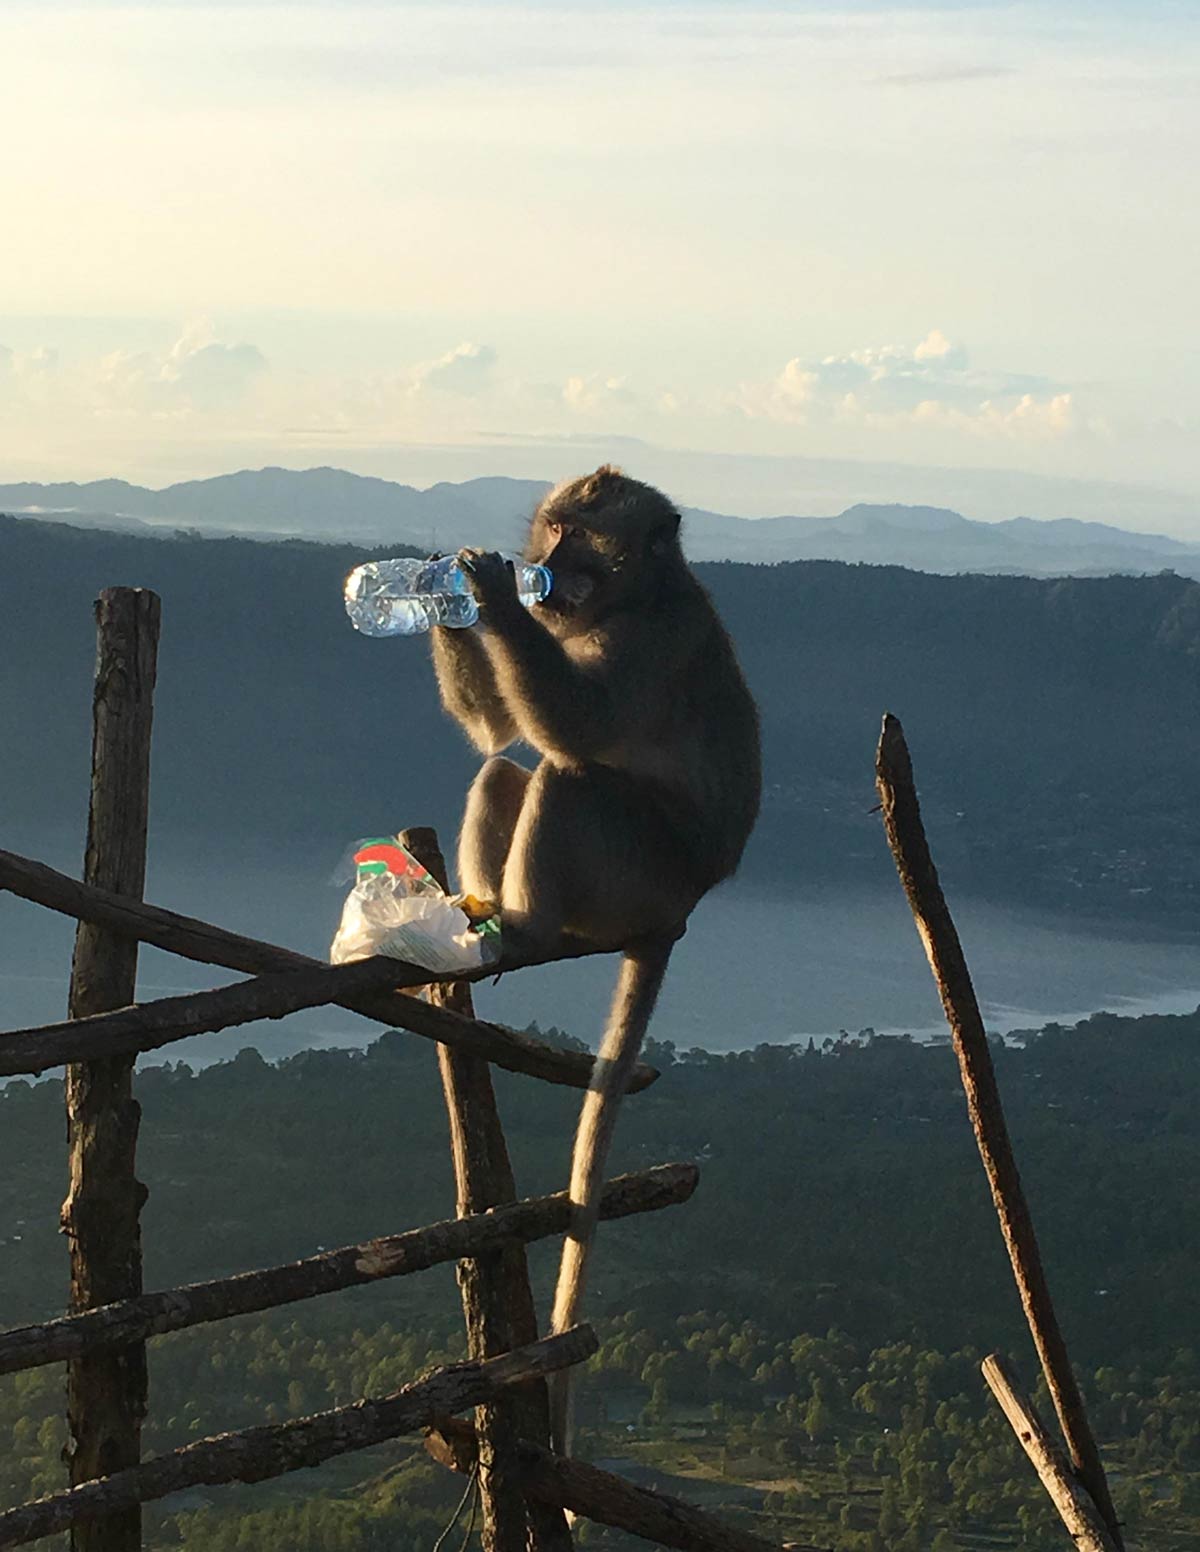 Hiked a mountain in hot weather. A monkey stole my water at the top then proceeded to drink it on front of me